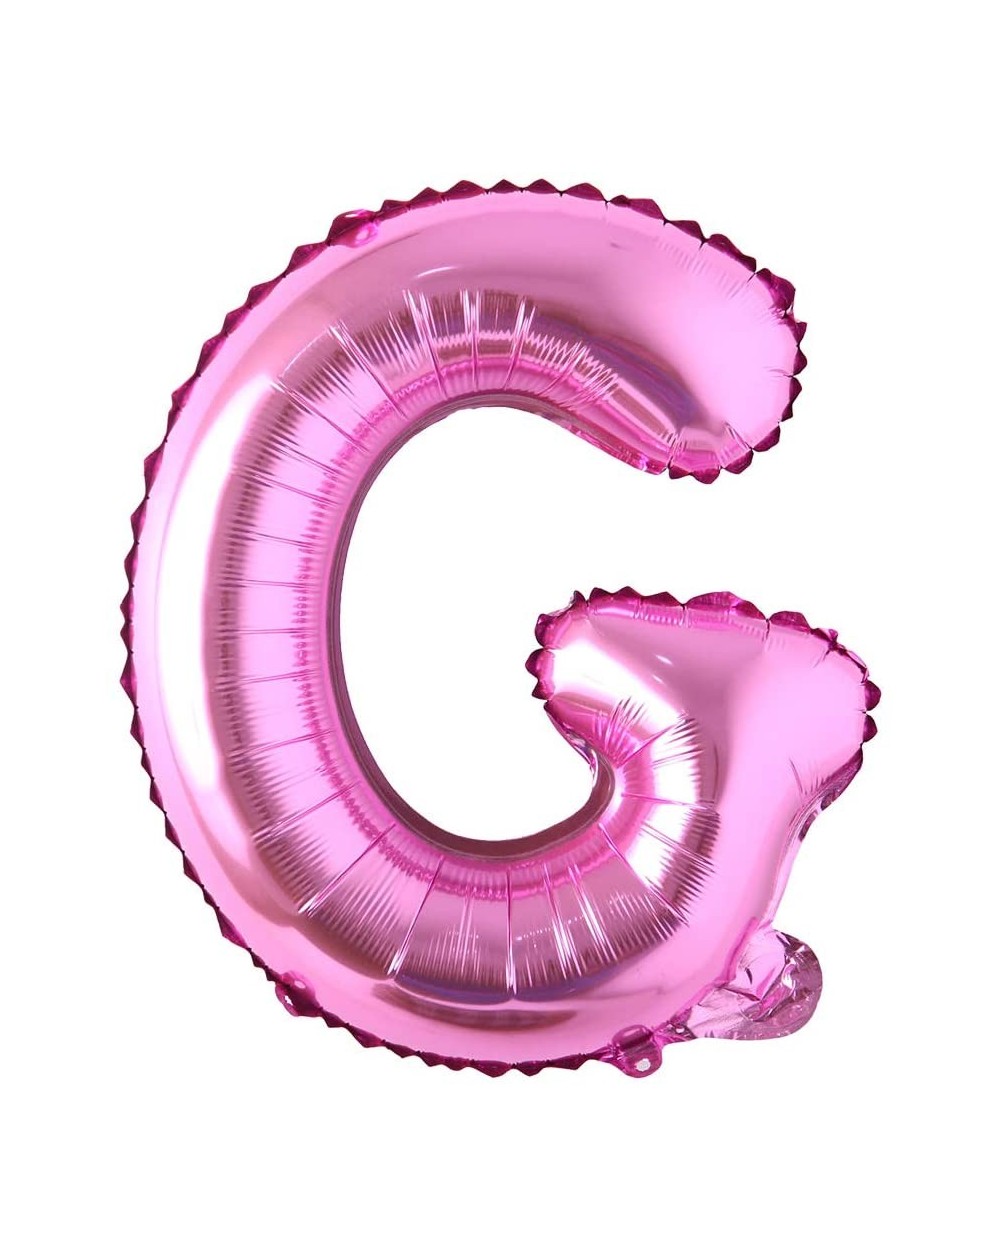 Balloons 40 inch Rose Red Letter Balloon Birthday Party Decorations Kids Wedding Balloons Banner Alphabet Air Anniversary Bab...